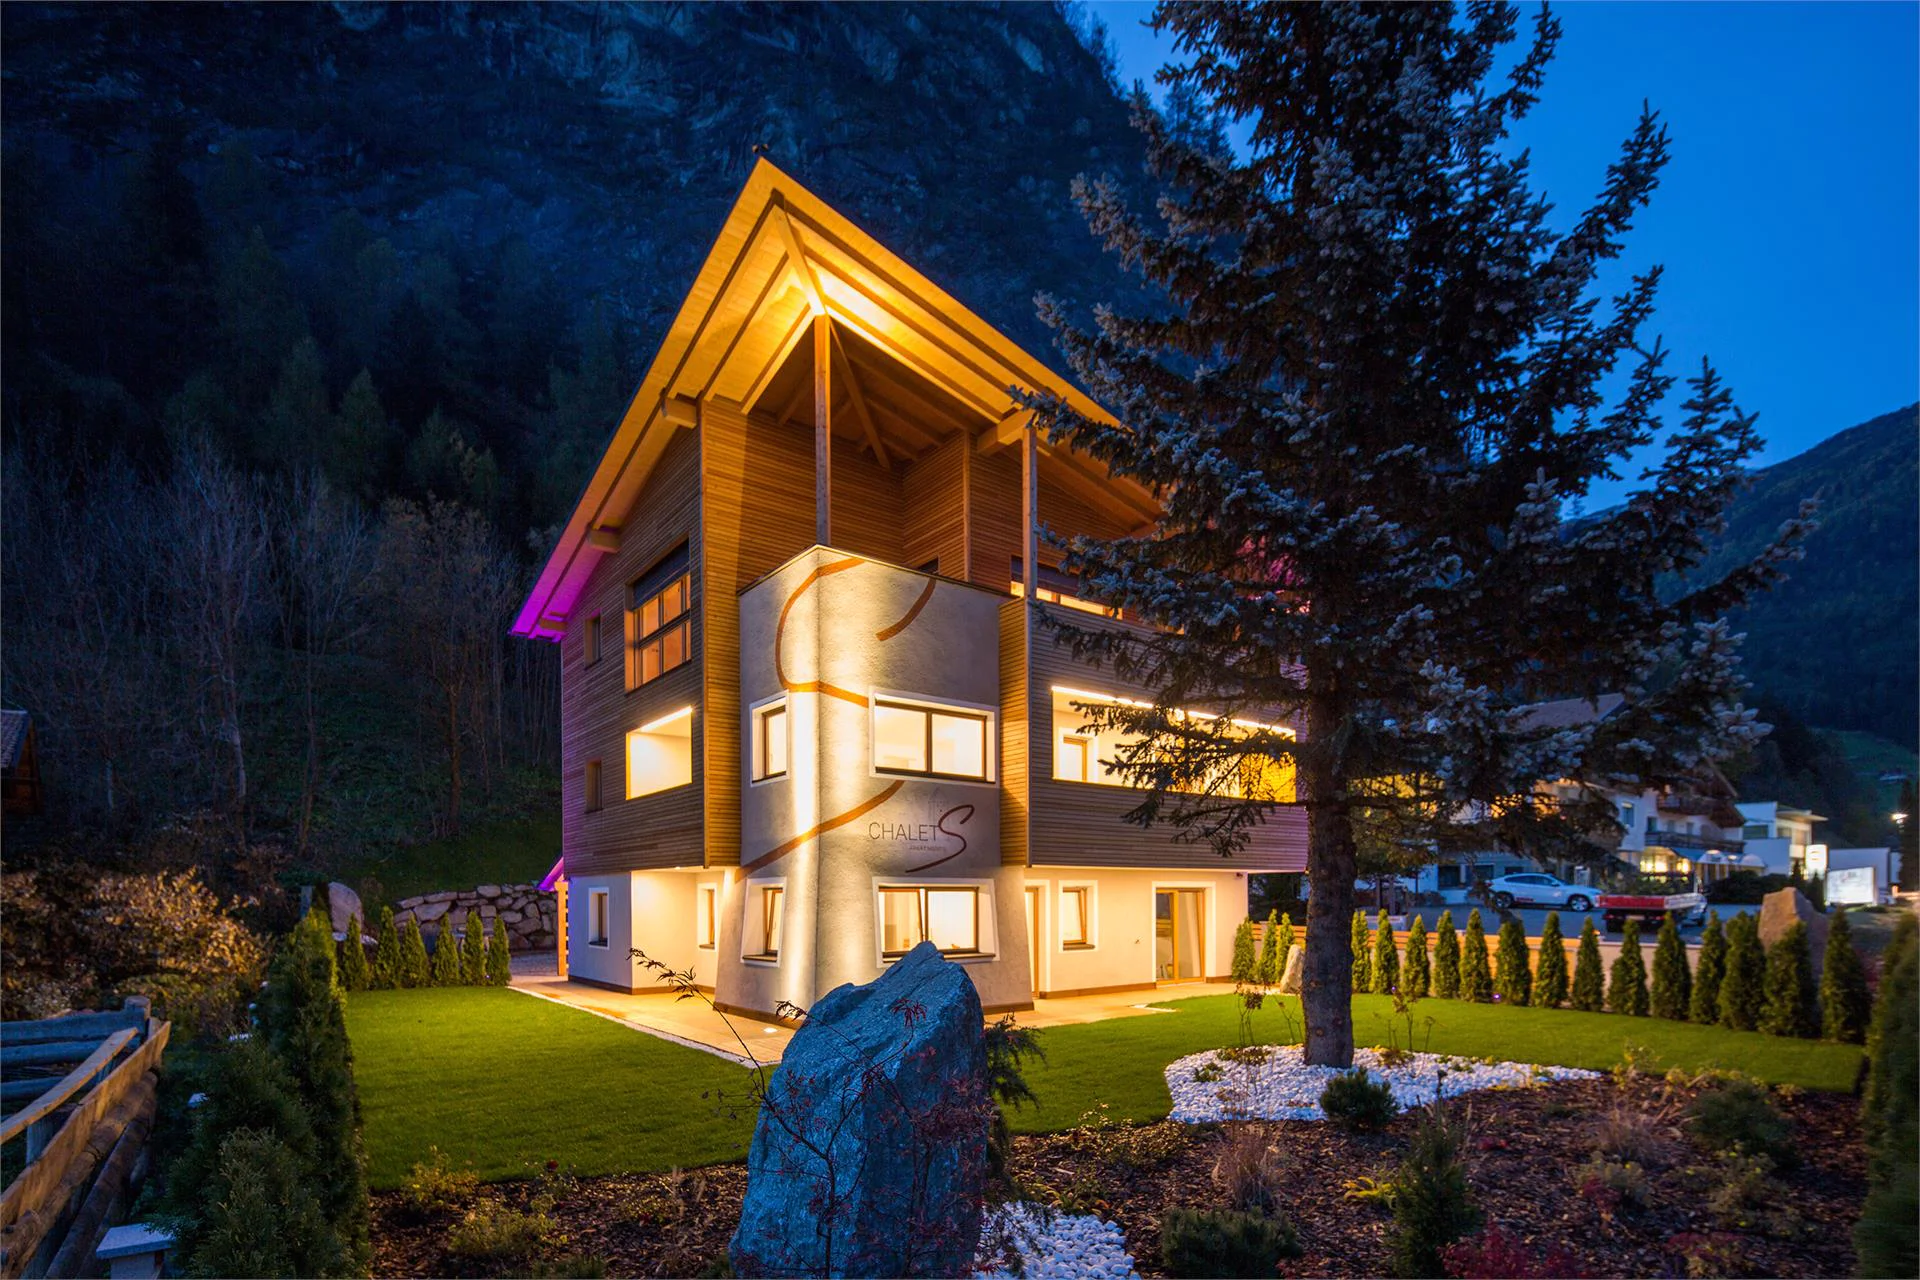 Chalet S Apartments Sand in Taufers/Campo Tures 4 suedtirol.info